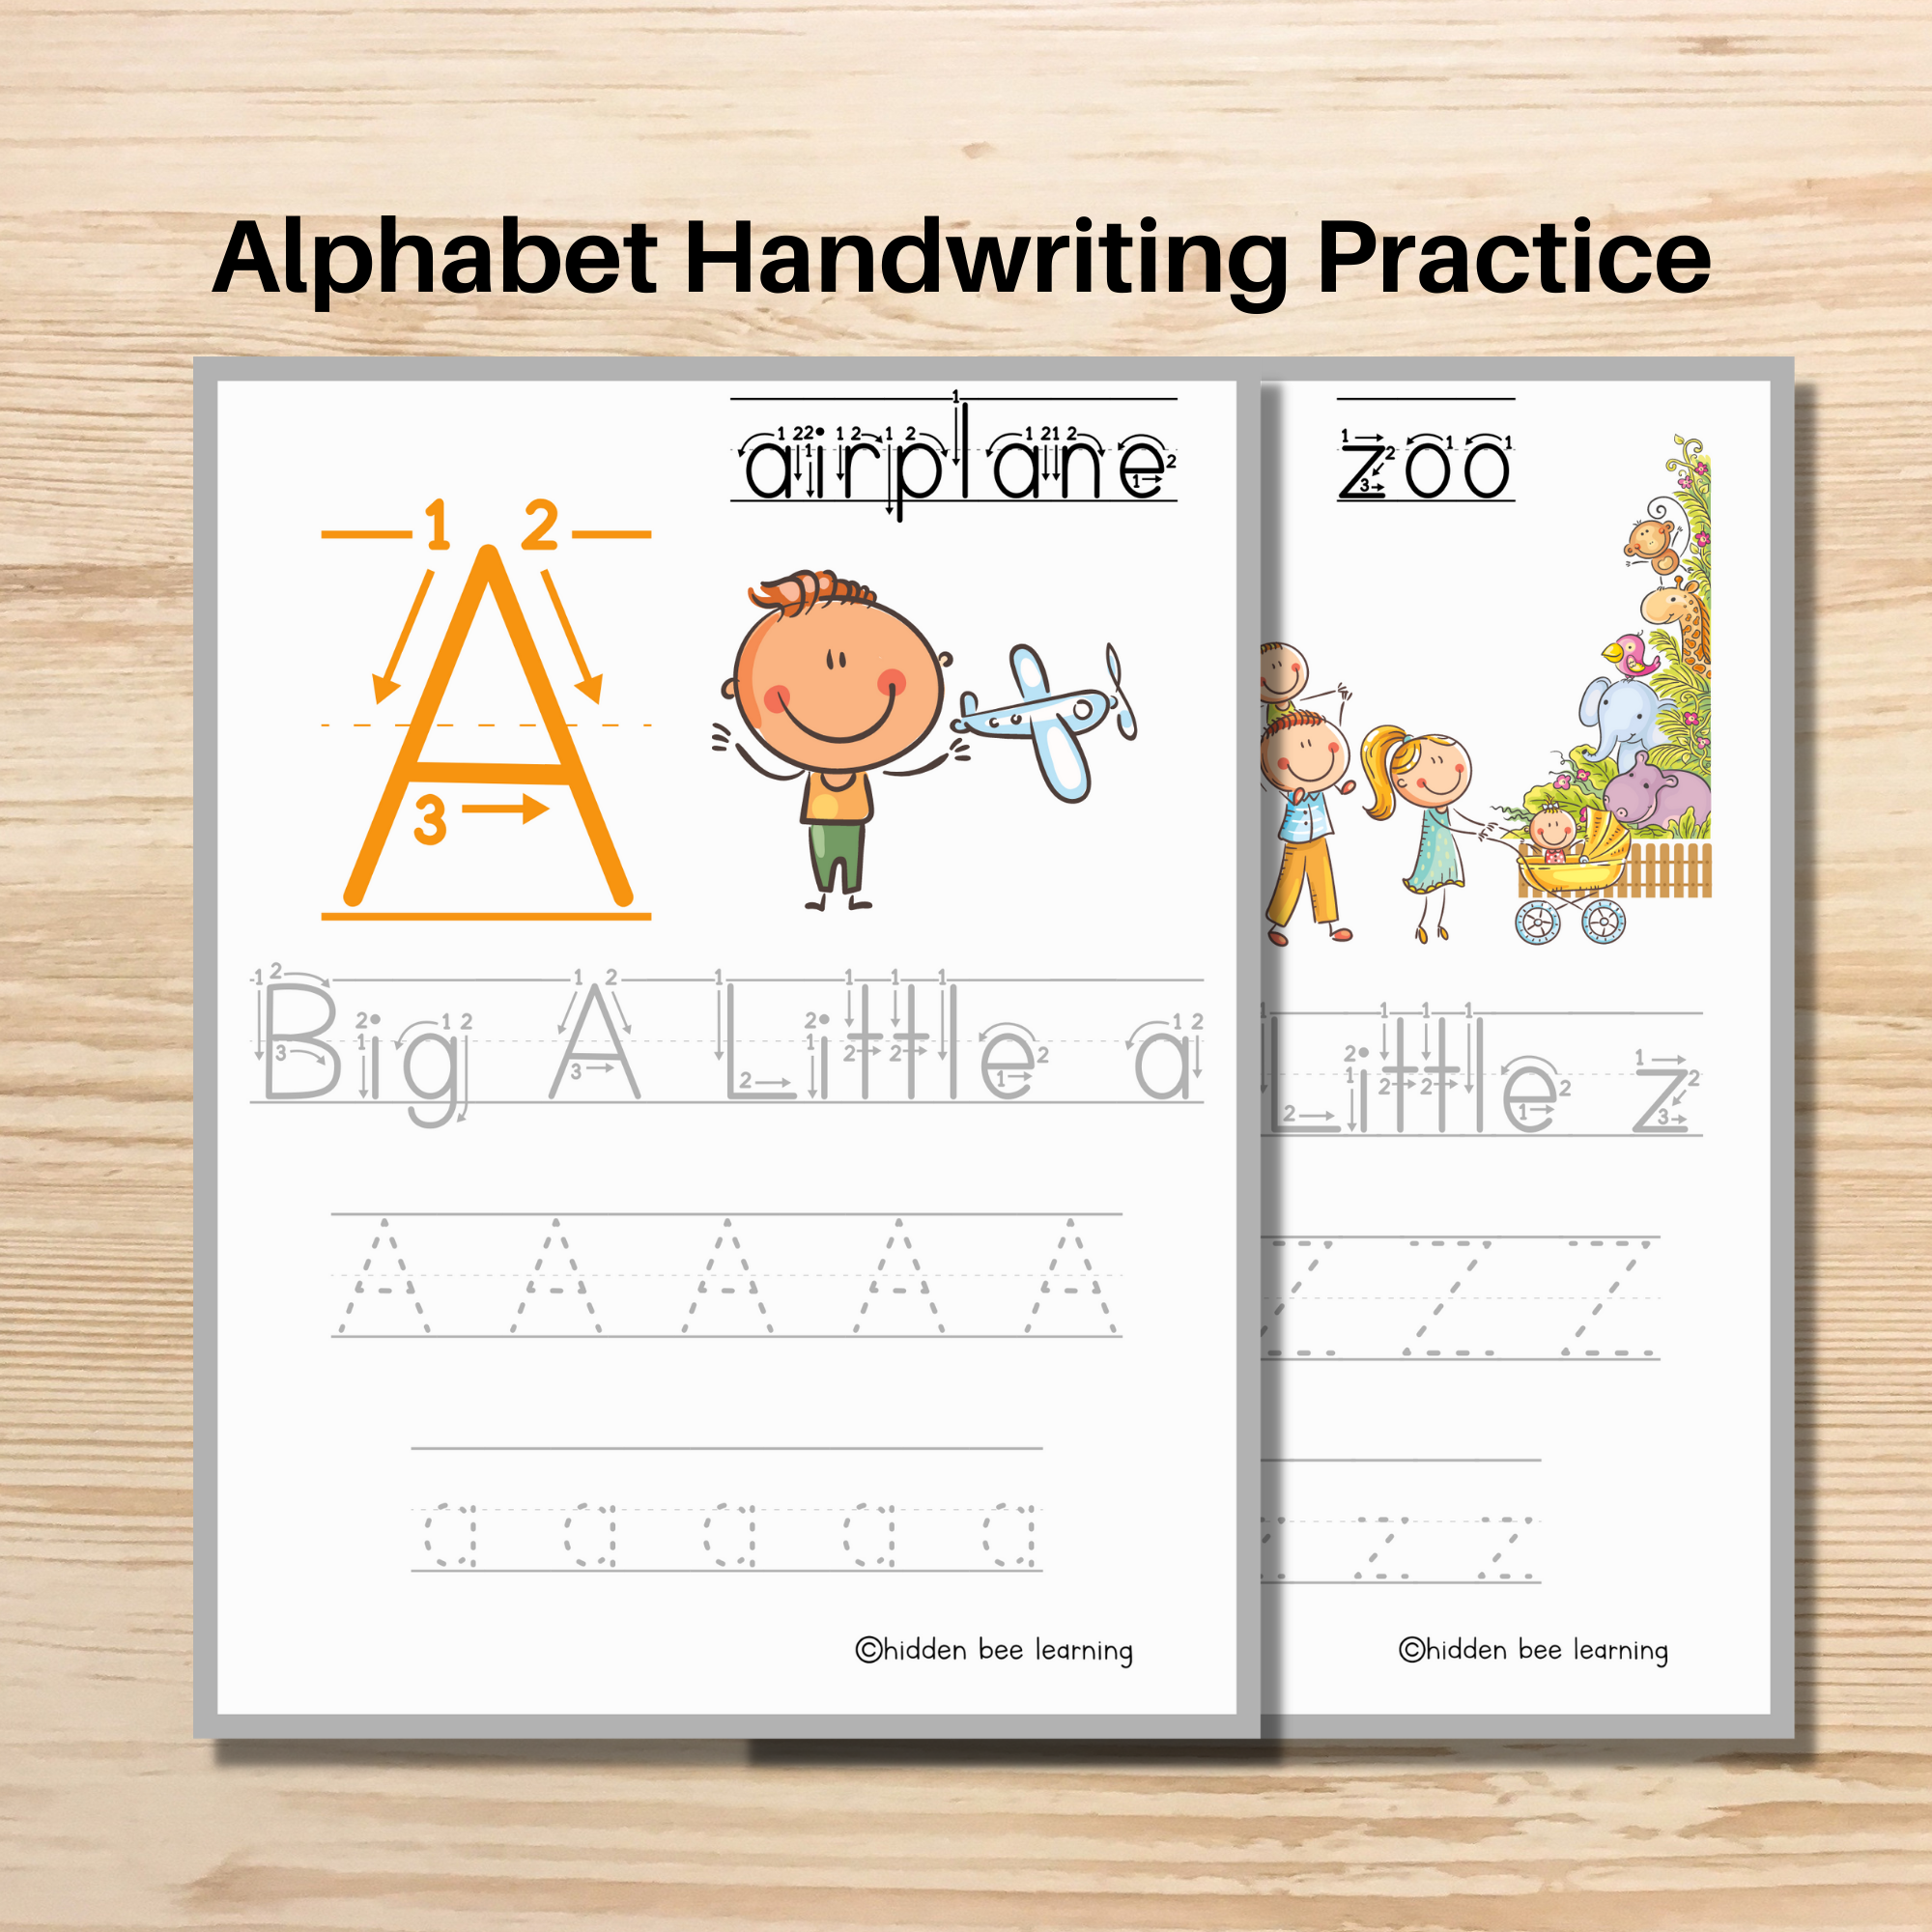 Handwriting Practice Book's featured image